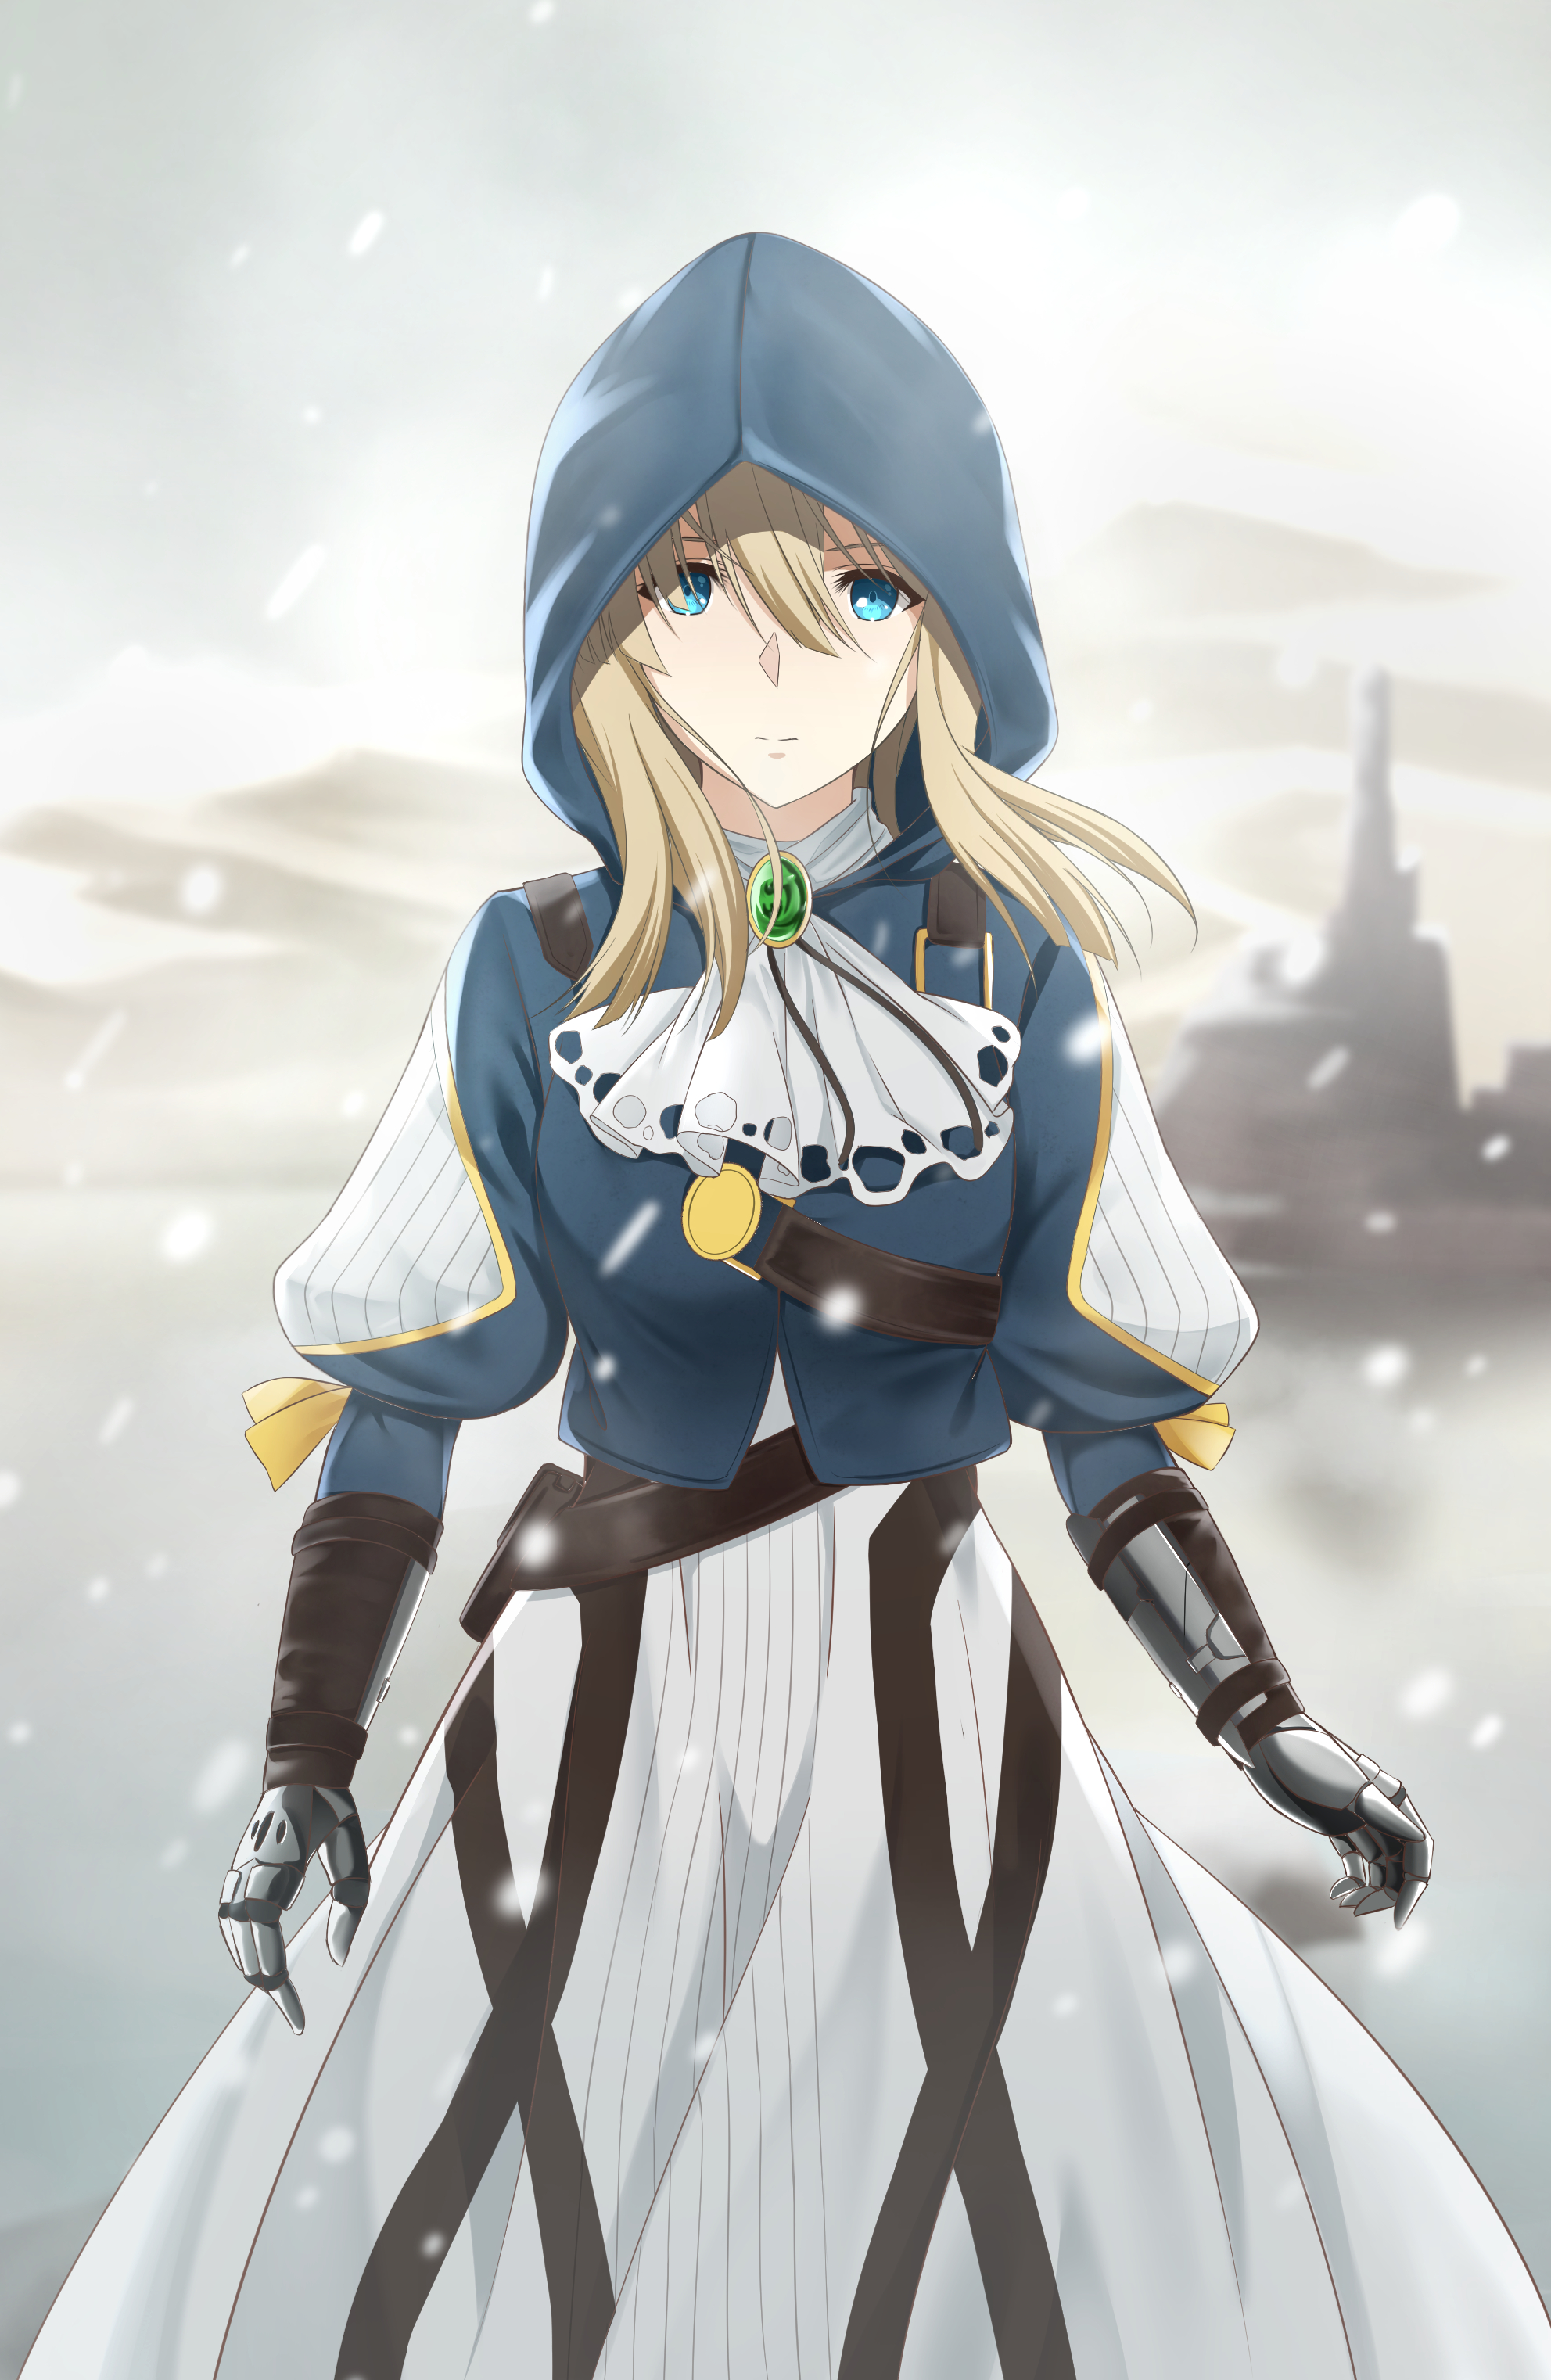 Violet Evergarden Wallpapers High Quality | Download Free